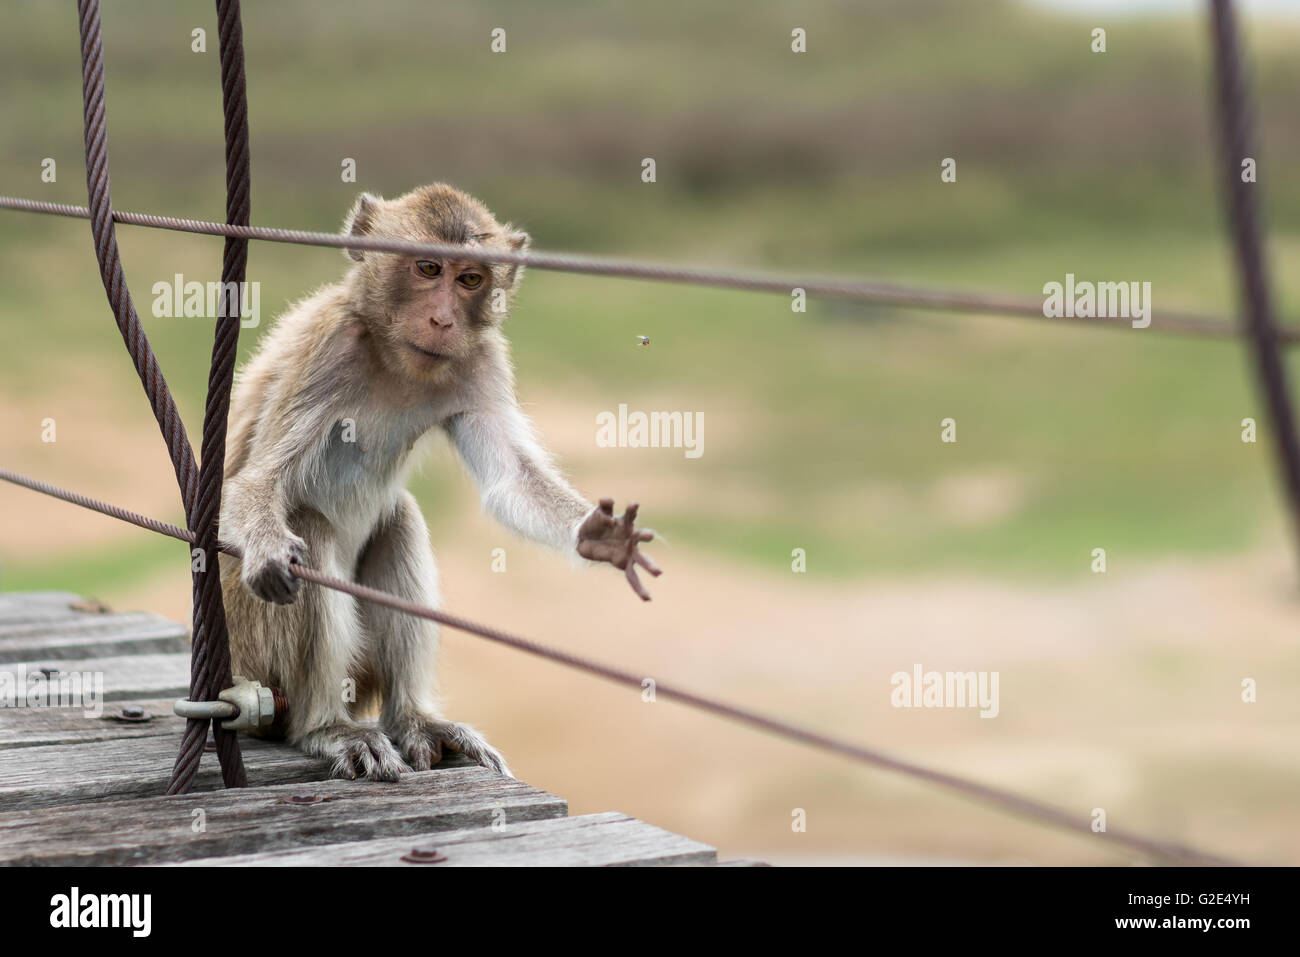 Hungry monkey, wounded animal, catching a fly to eat, hunger or survival concept Stock Photo